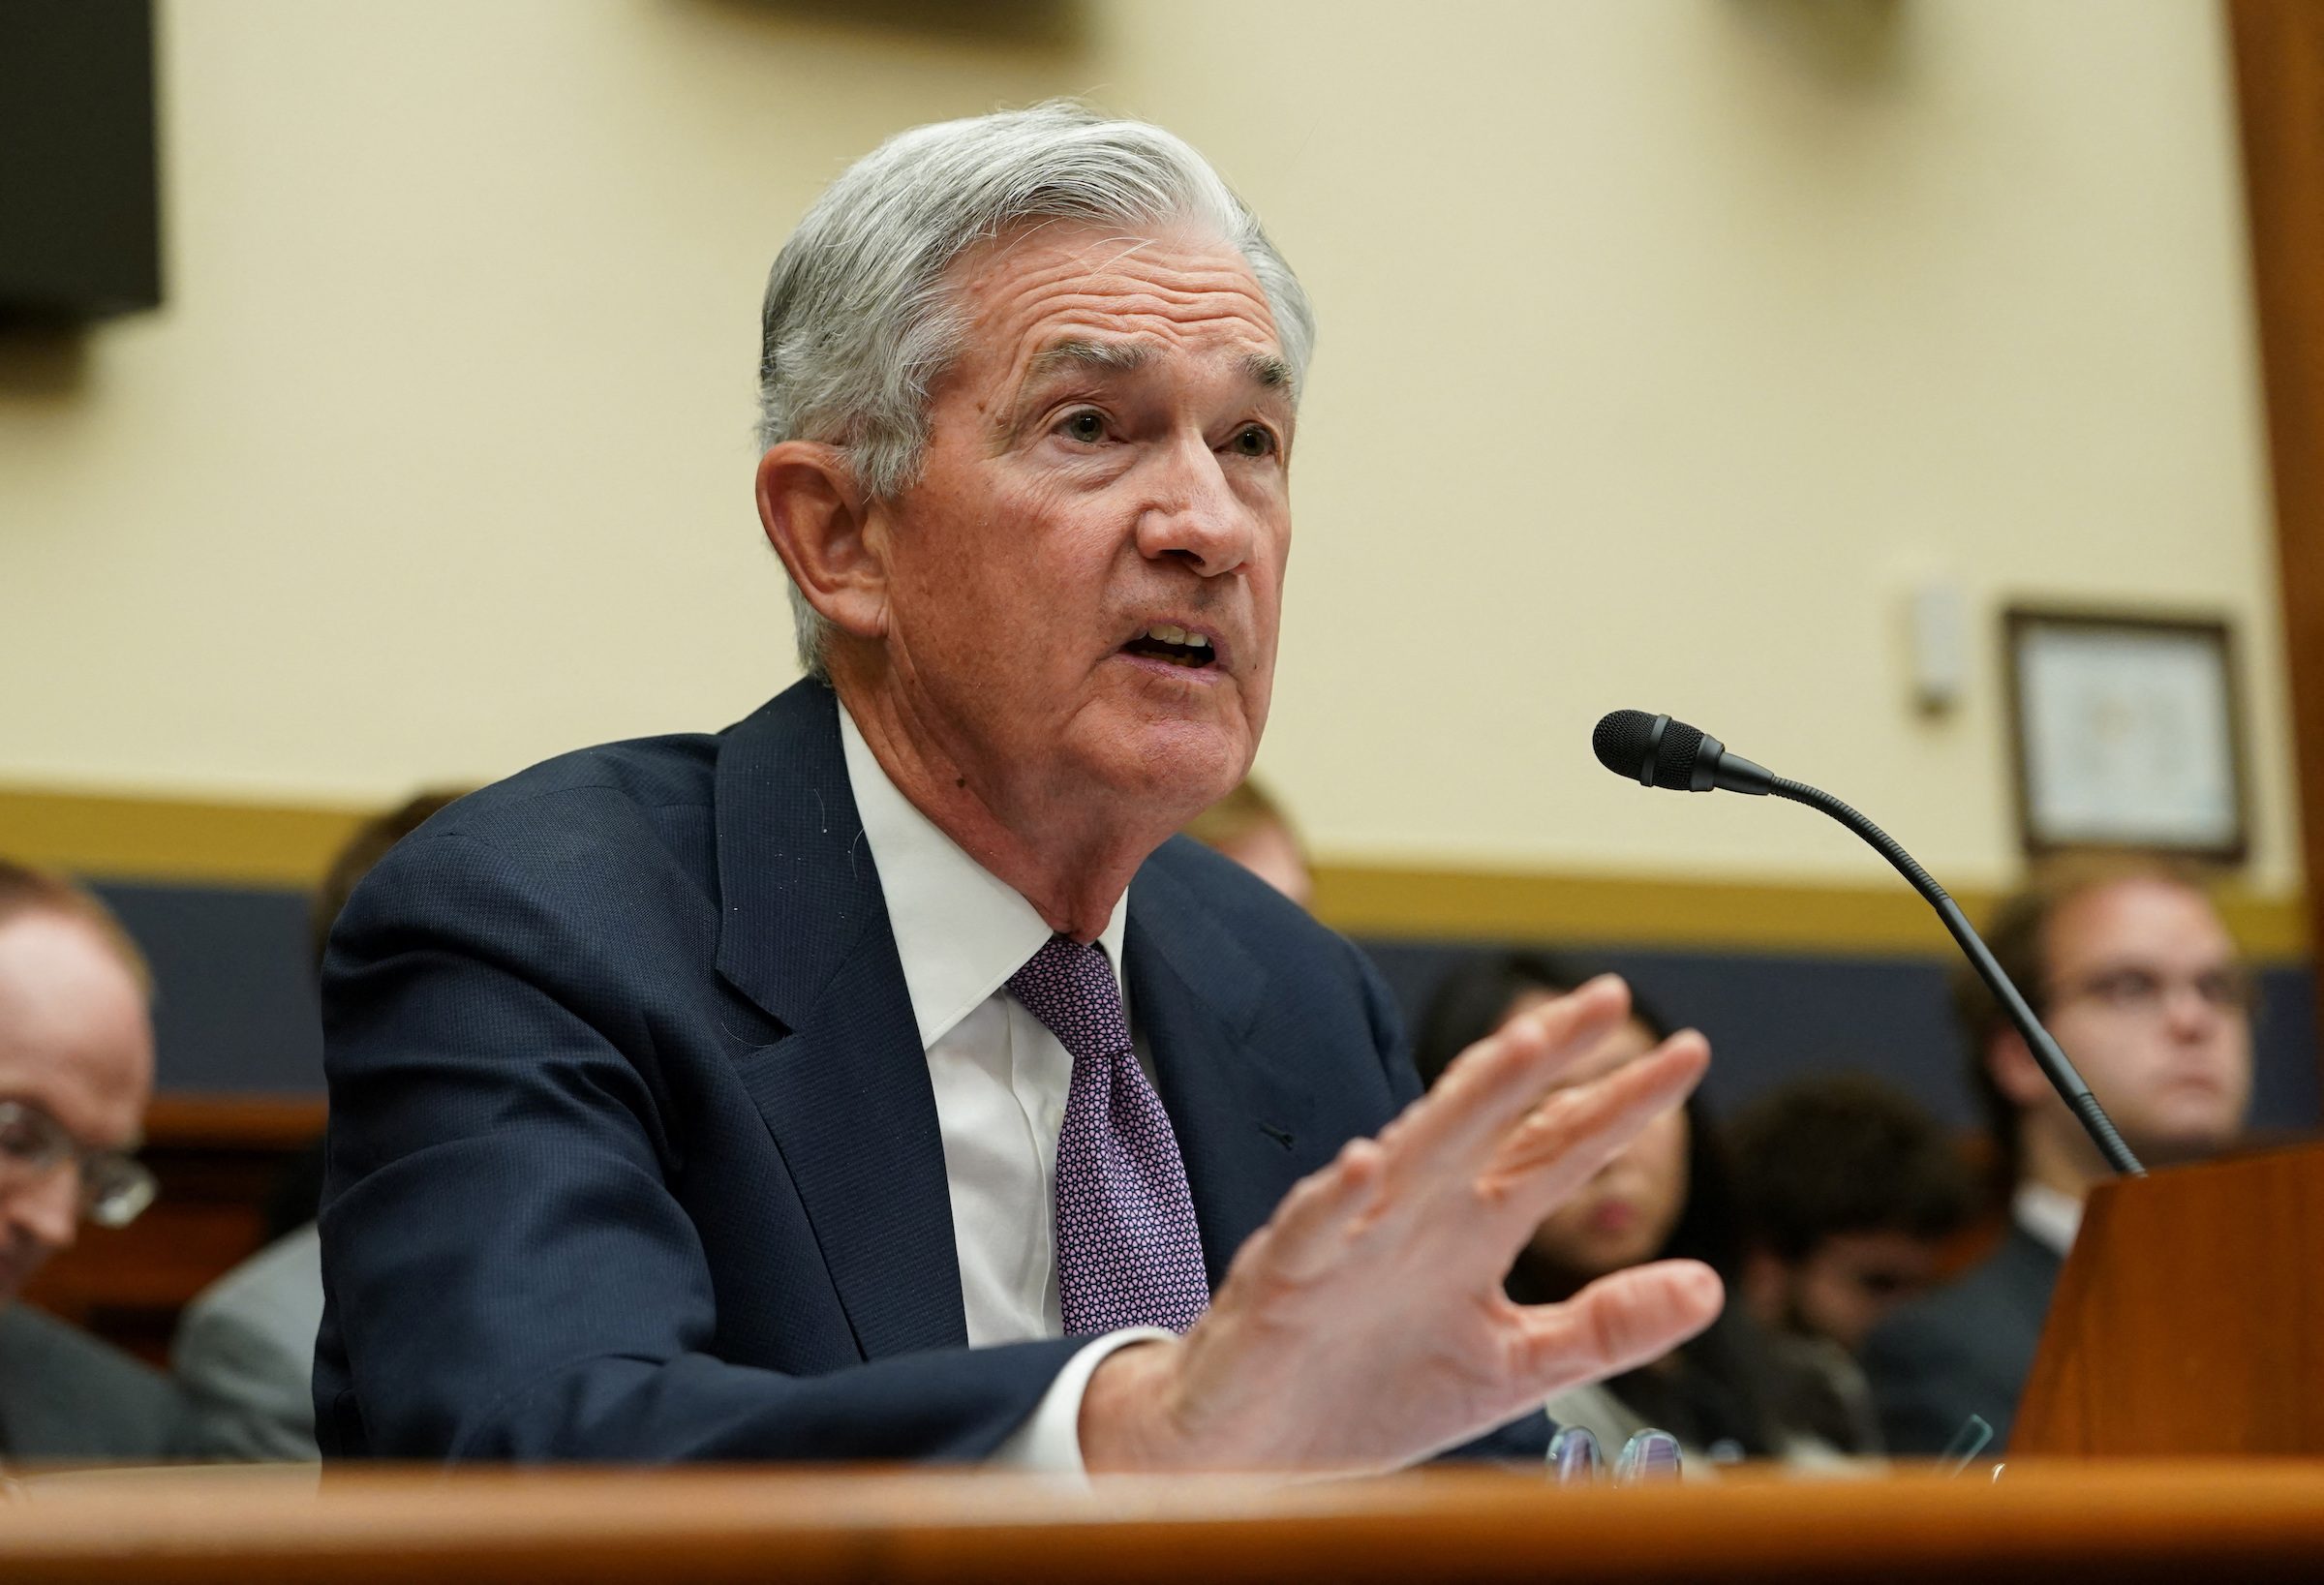 Fed still up in the air on whether to accelerate rate hikes, Powell says